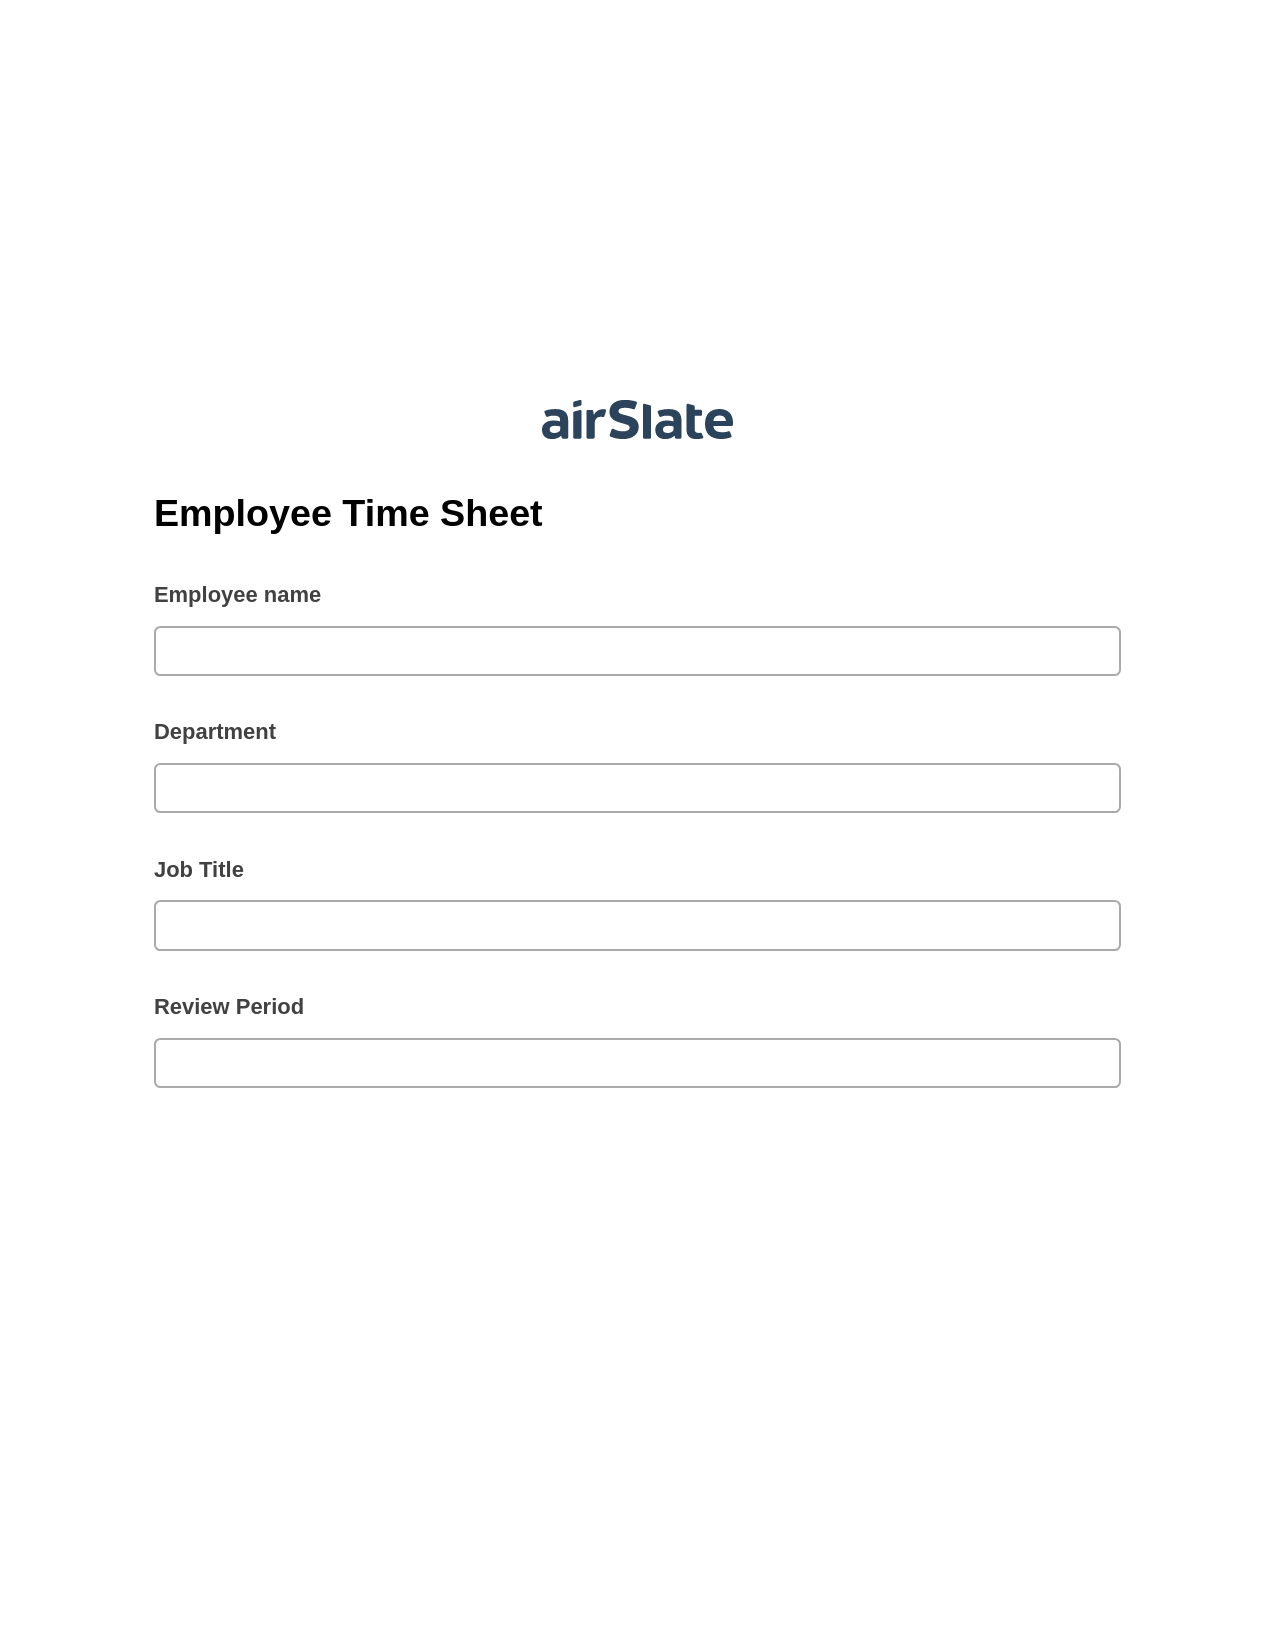 Multirole Employee Time Sheet Pre-fill Dropdowns from CSV file Bot, Create Salesforce Records Bot, Export to Smartsheet